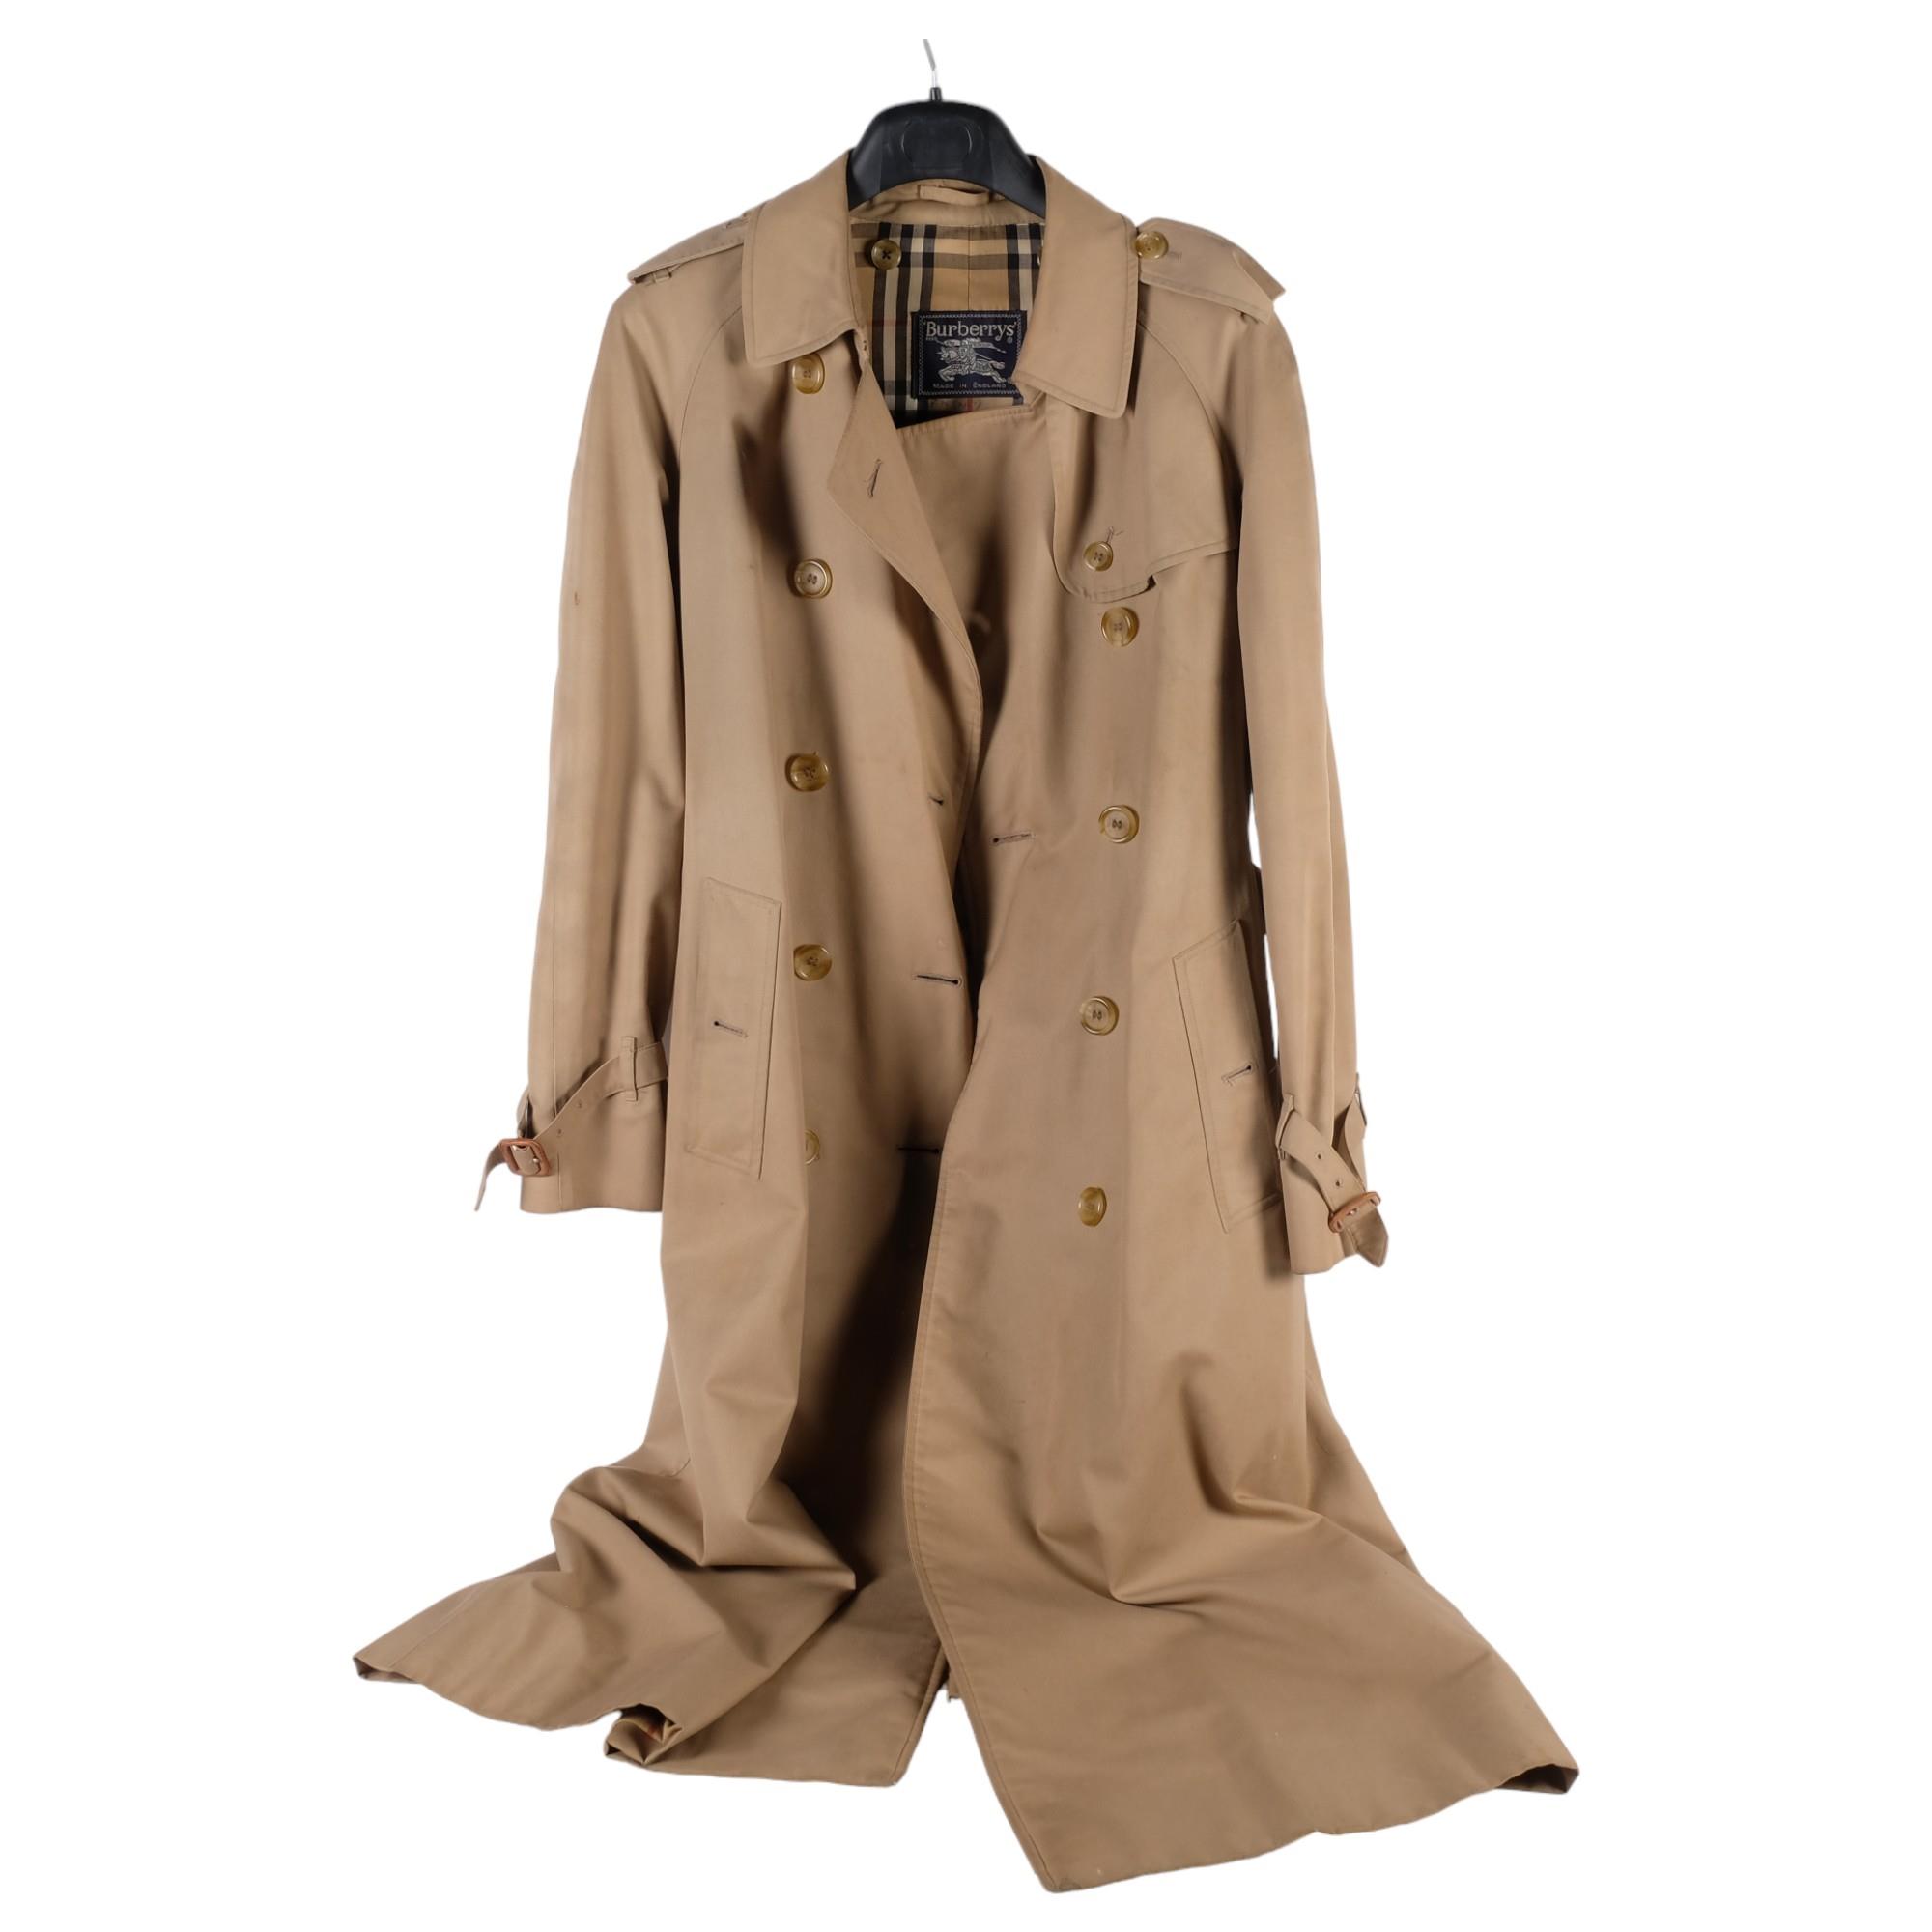 BURBERRY - a lady's trench coat with tartan lining